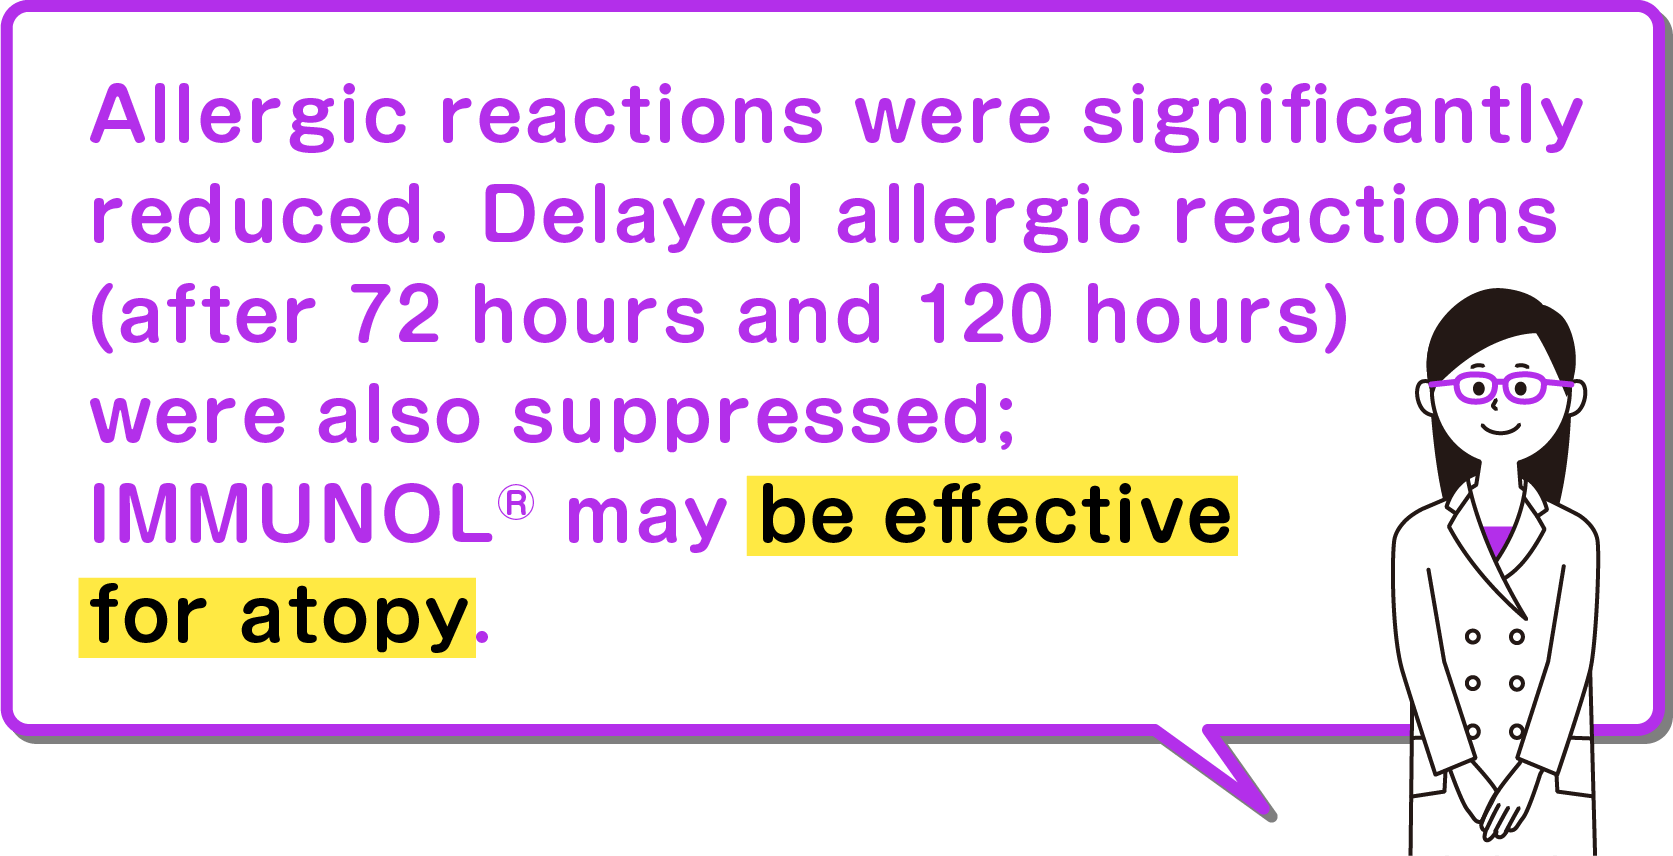 Allergic reactions were significantly reduced. Delayed allergic reactions (after 72 hours and 120 hours) were also suppressed; IMMUNOL® may be effective for atopy.